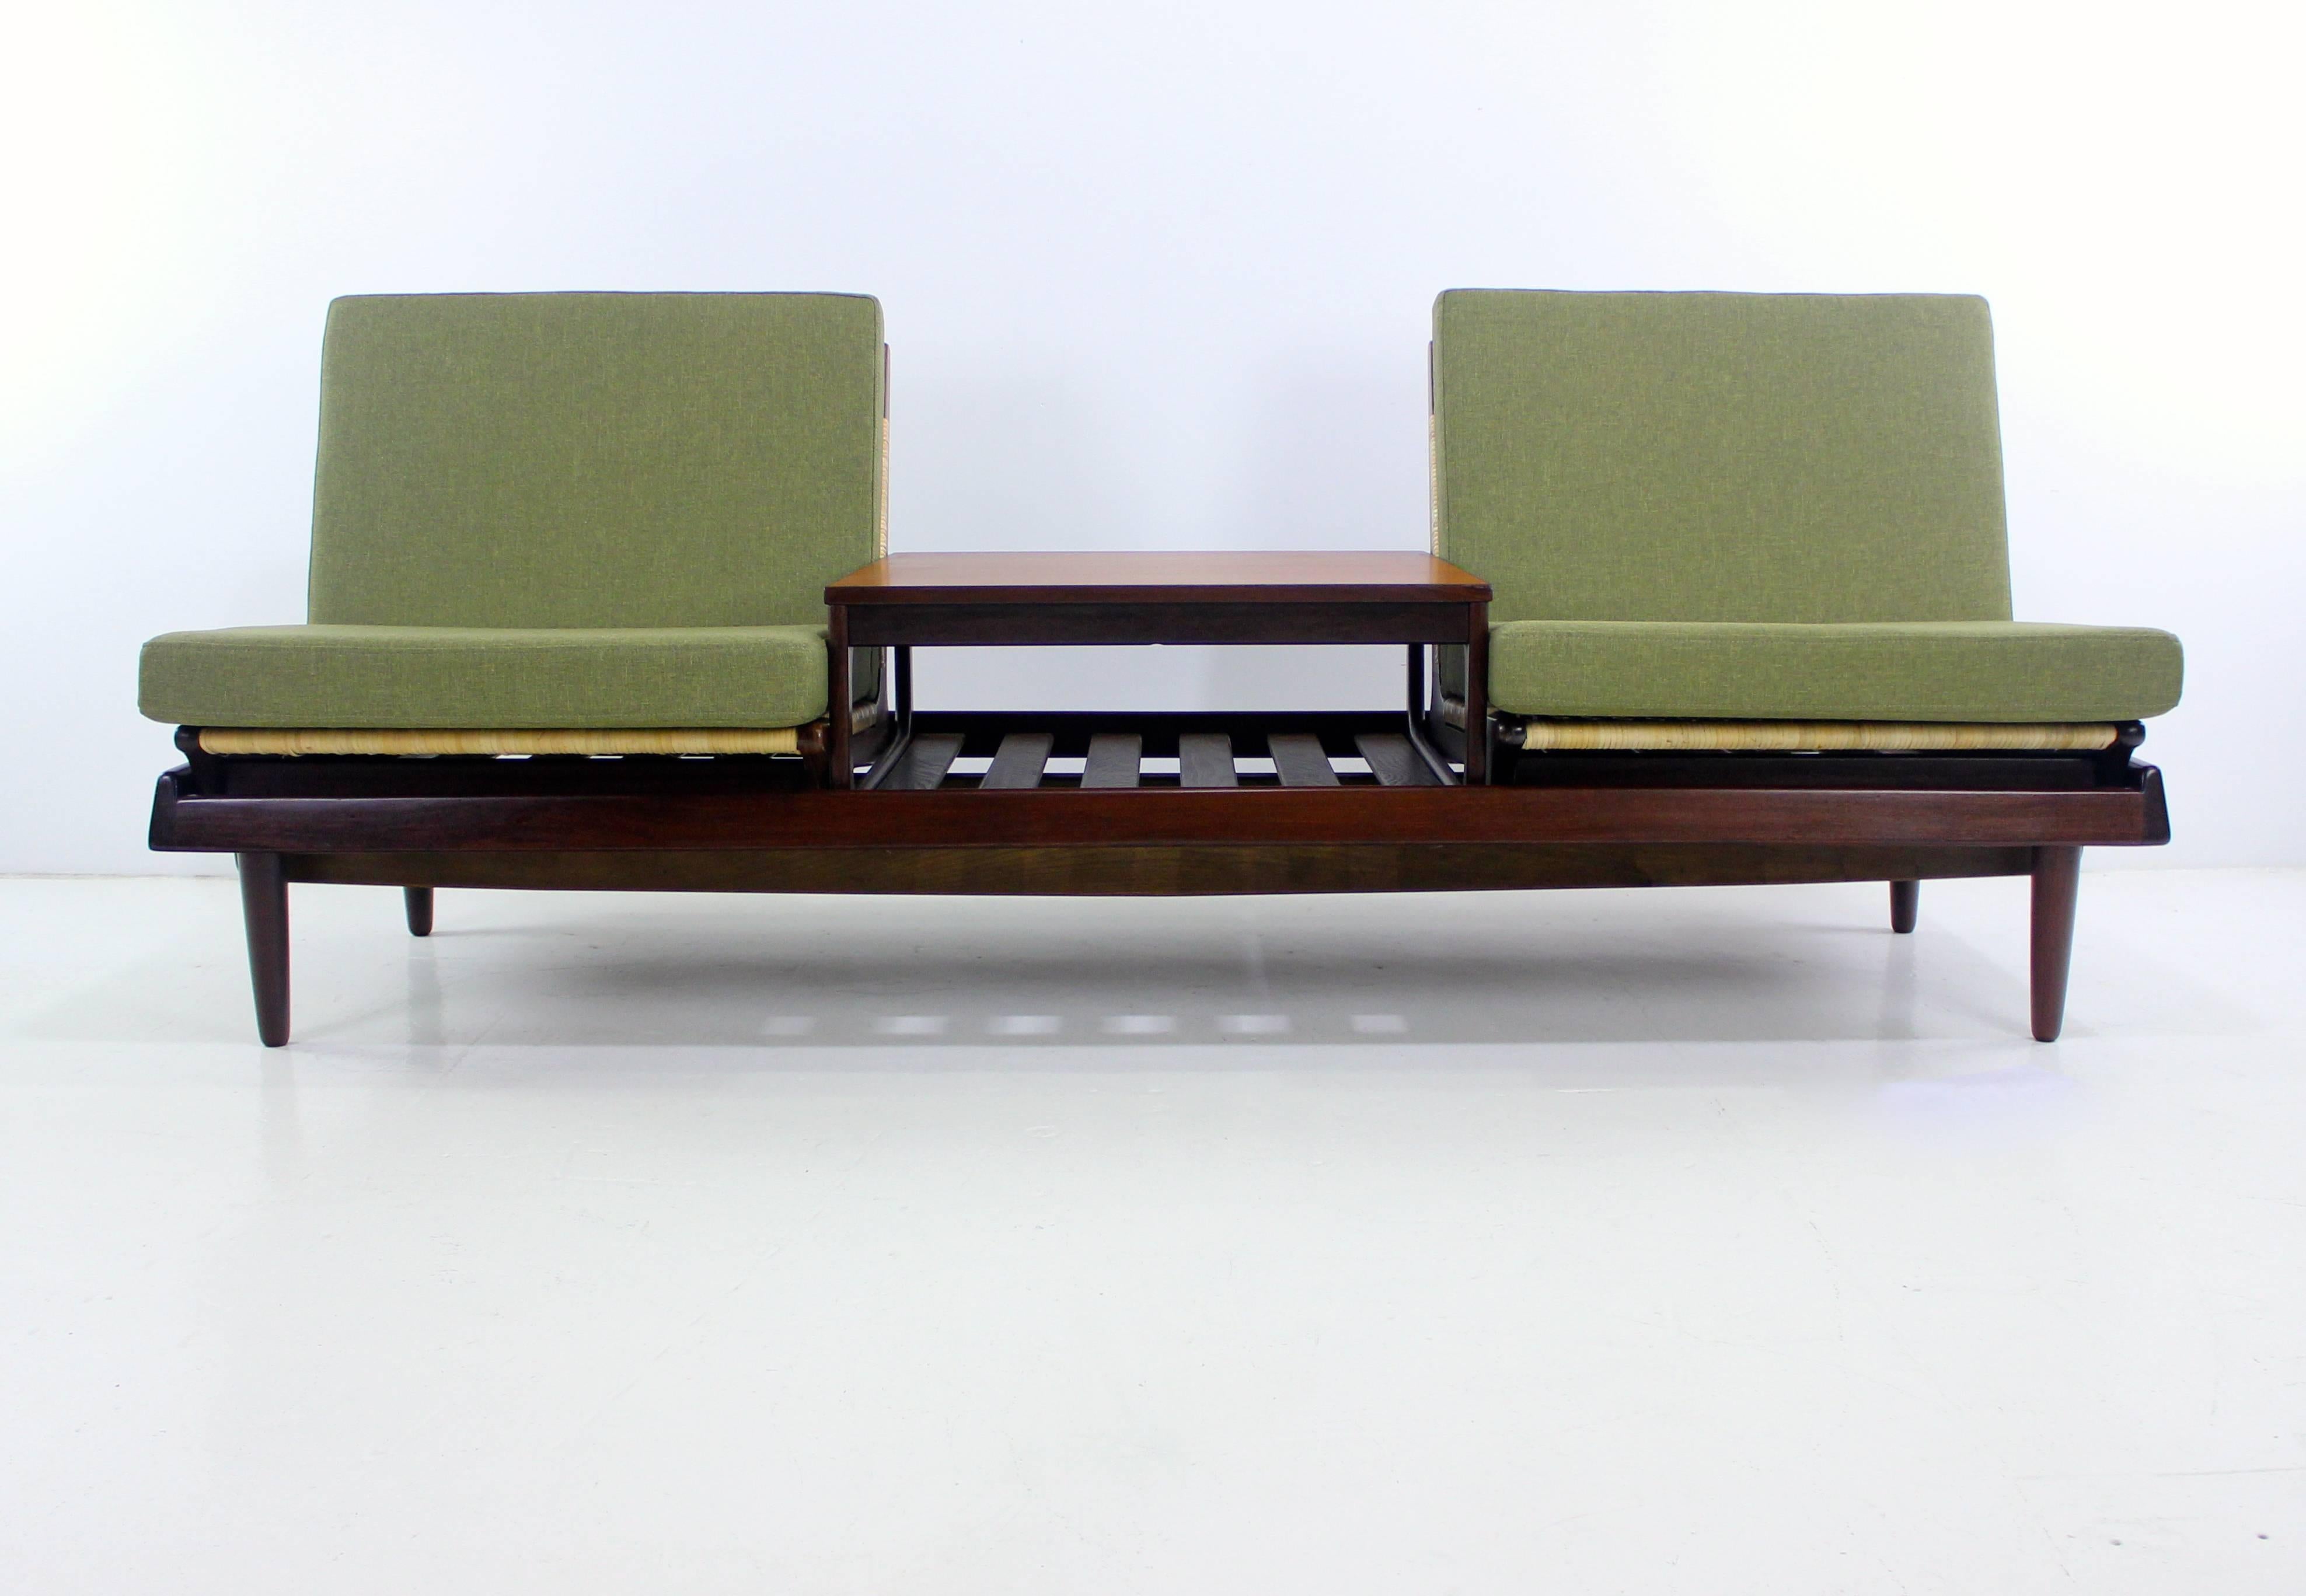 Danish modern seating group designed by Hans Olsen.
Bramin, maker. Model TV 161.
Richly grained teak frame.
Composed of four separate pieces including:
Two newly caned chairs.
Bench with four removable cushions newly upholstered in highest